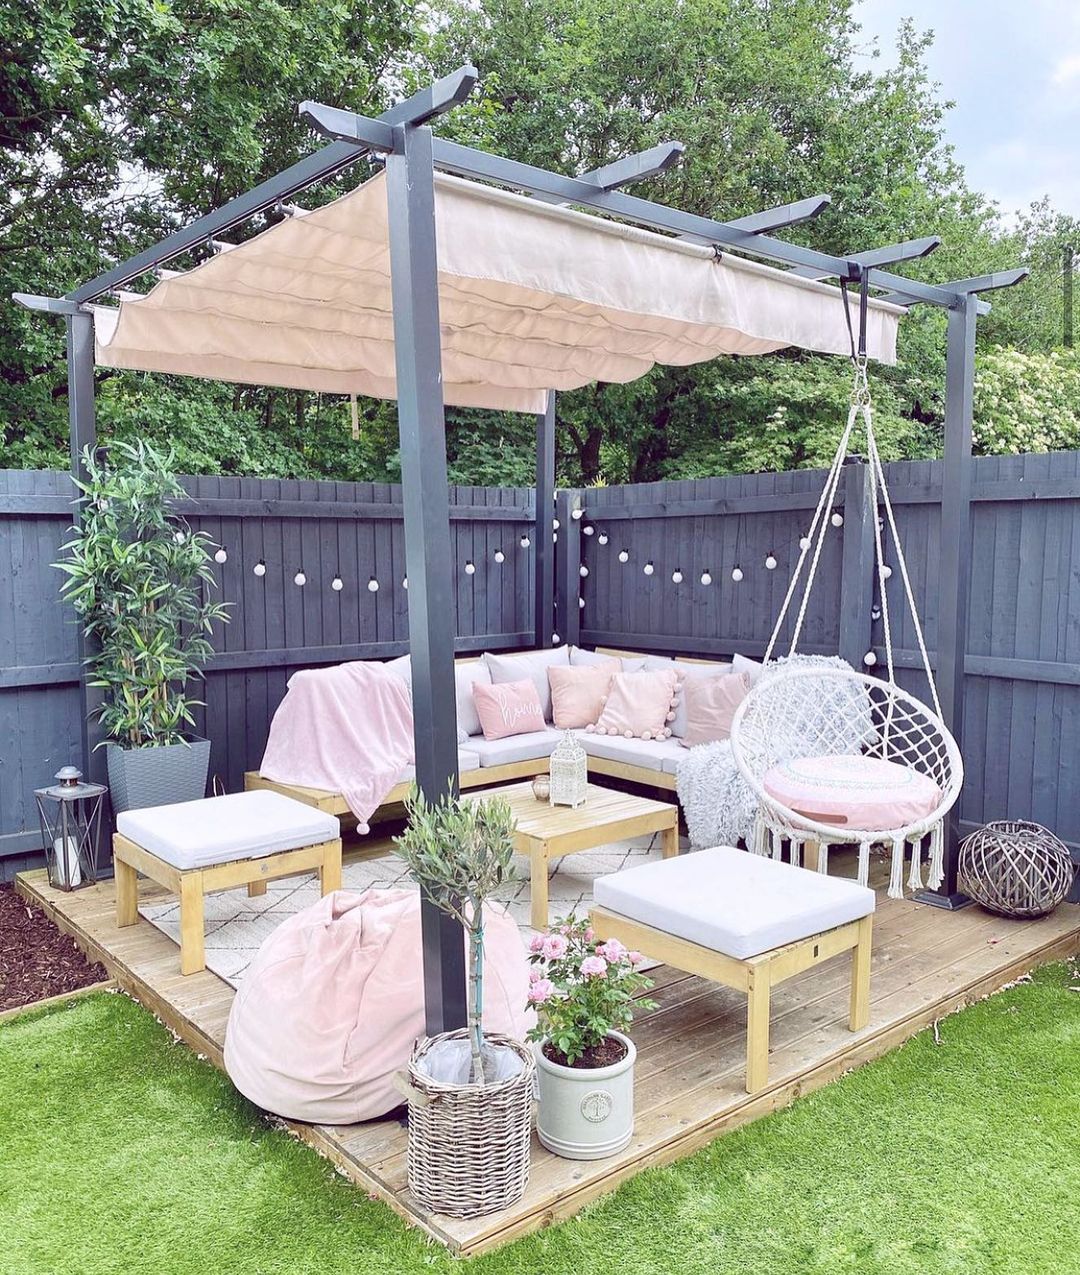 Small Backyard Corner Patio with an Outdoor Canopy Installed. Photo by Instagram user @luckyplot13